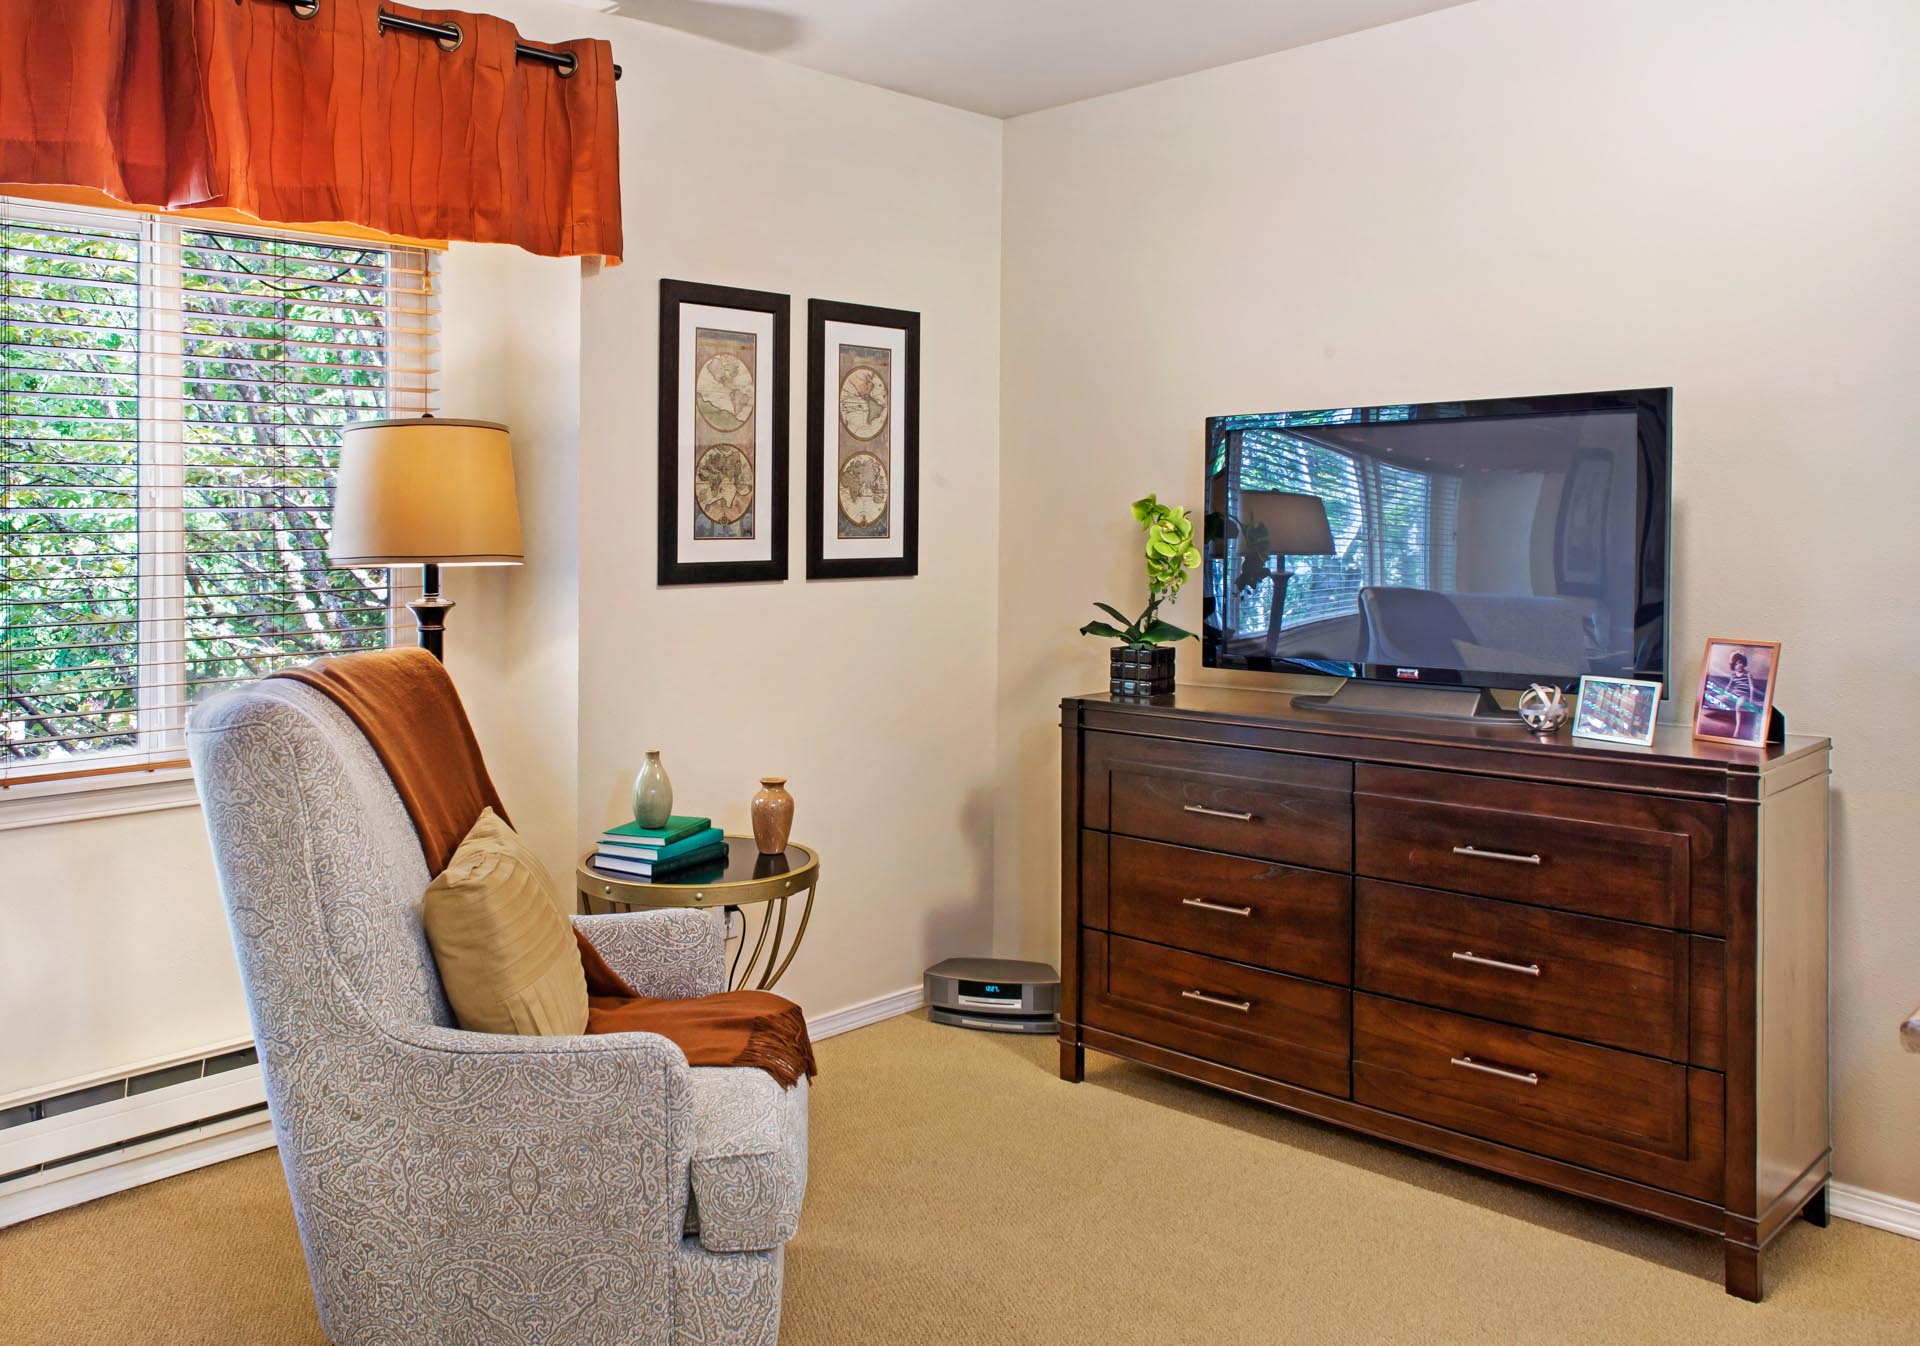 Living Room With Television at Cogir of Northgate Memory Care, Seattle, WA, 98125